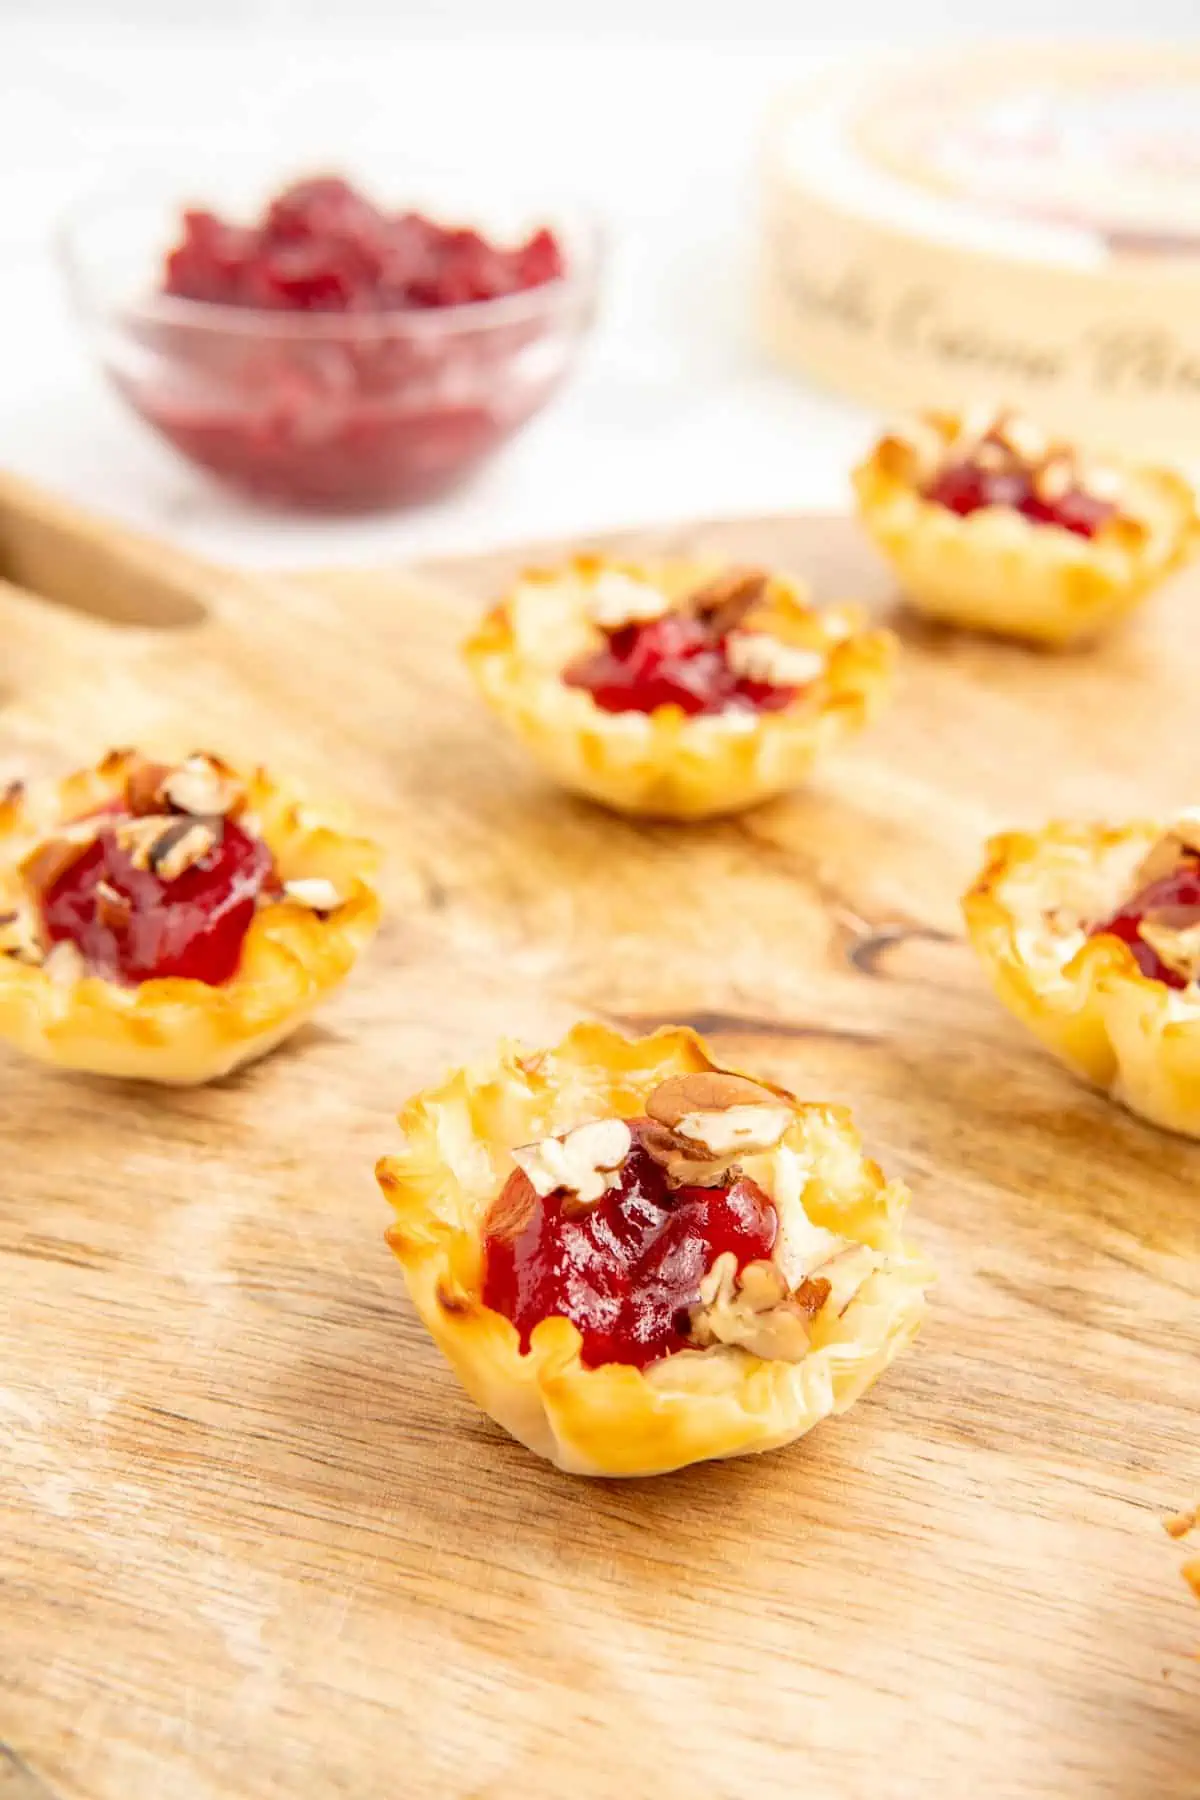 Phyllo shells filled with brie cheese, cranberry sauce, and pecans on a wooden surface.